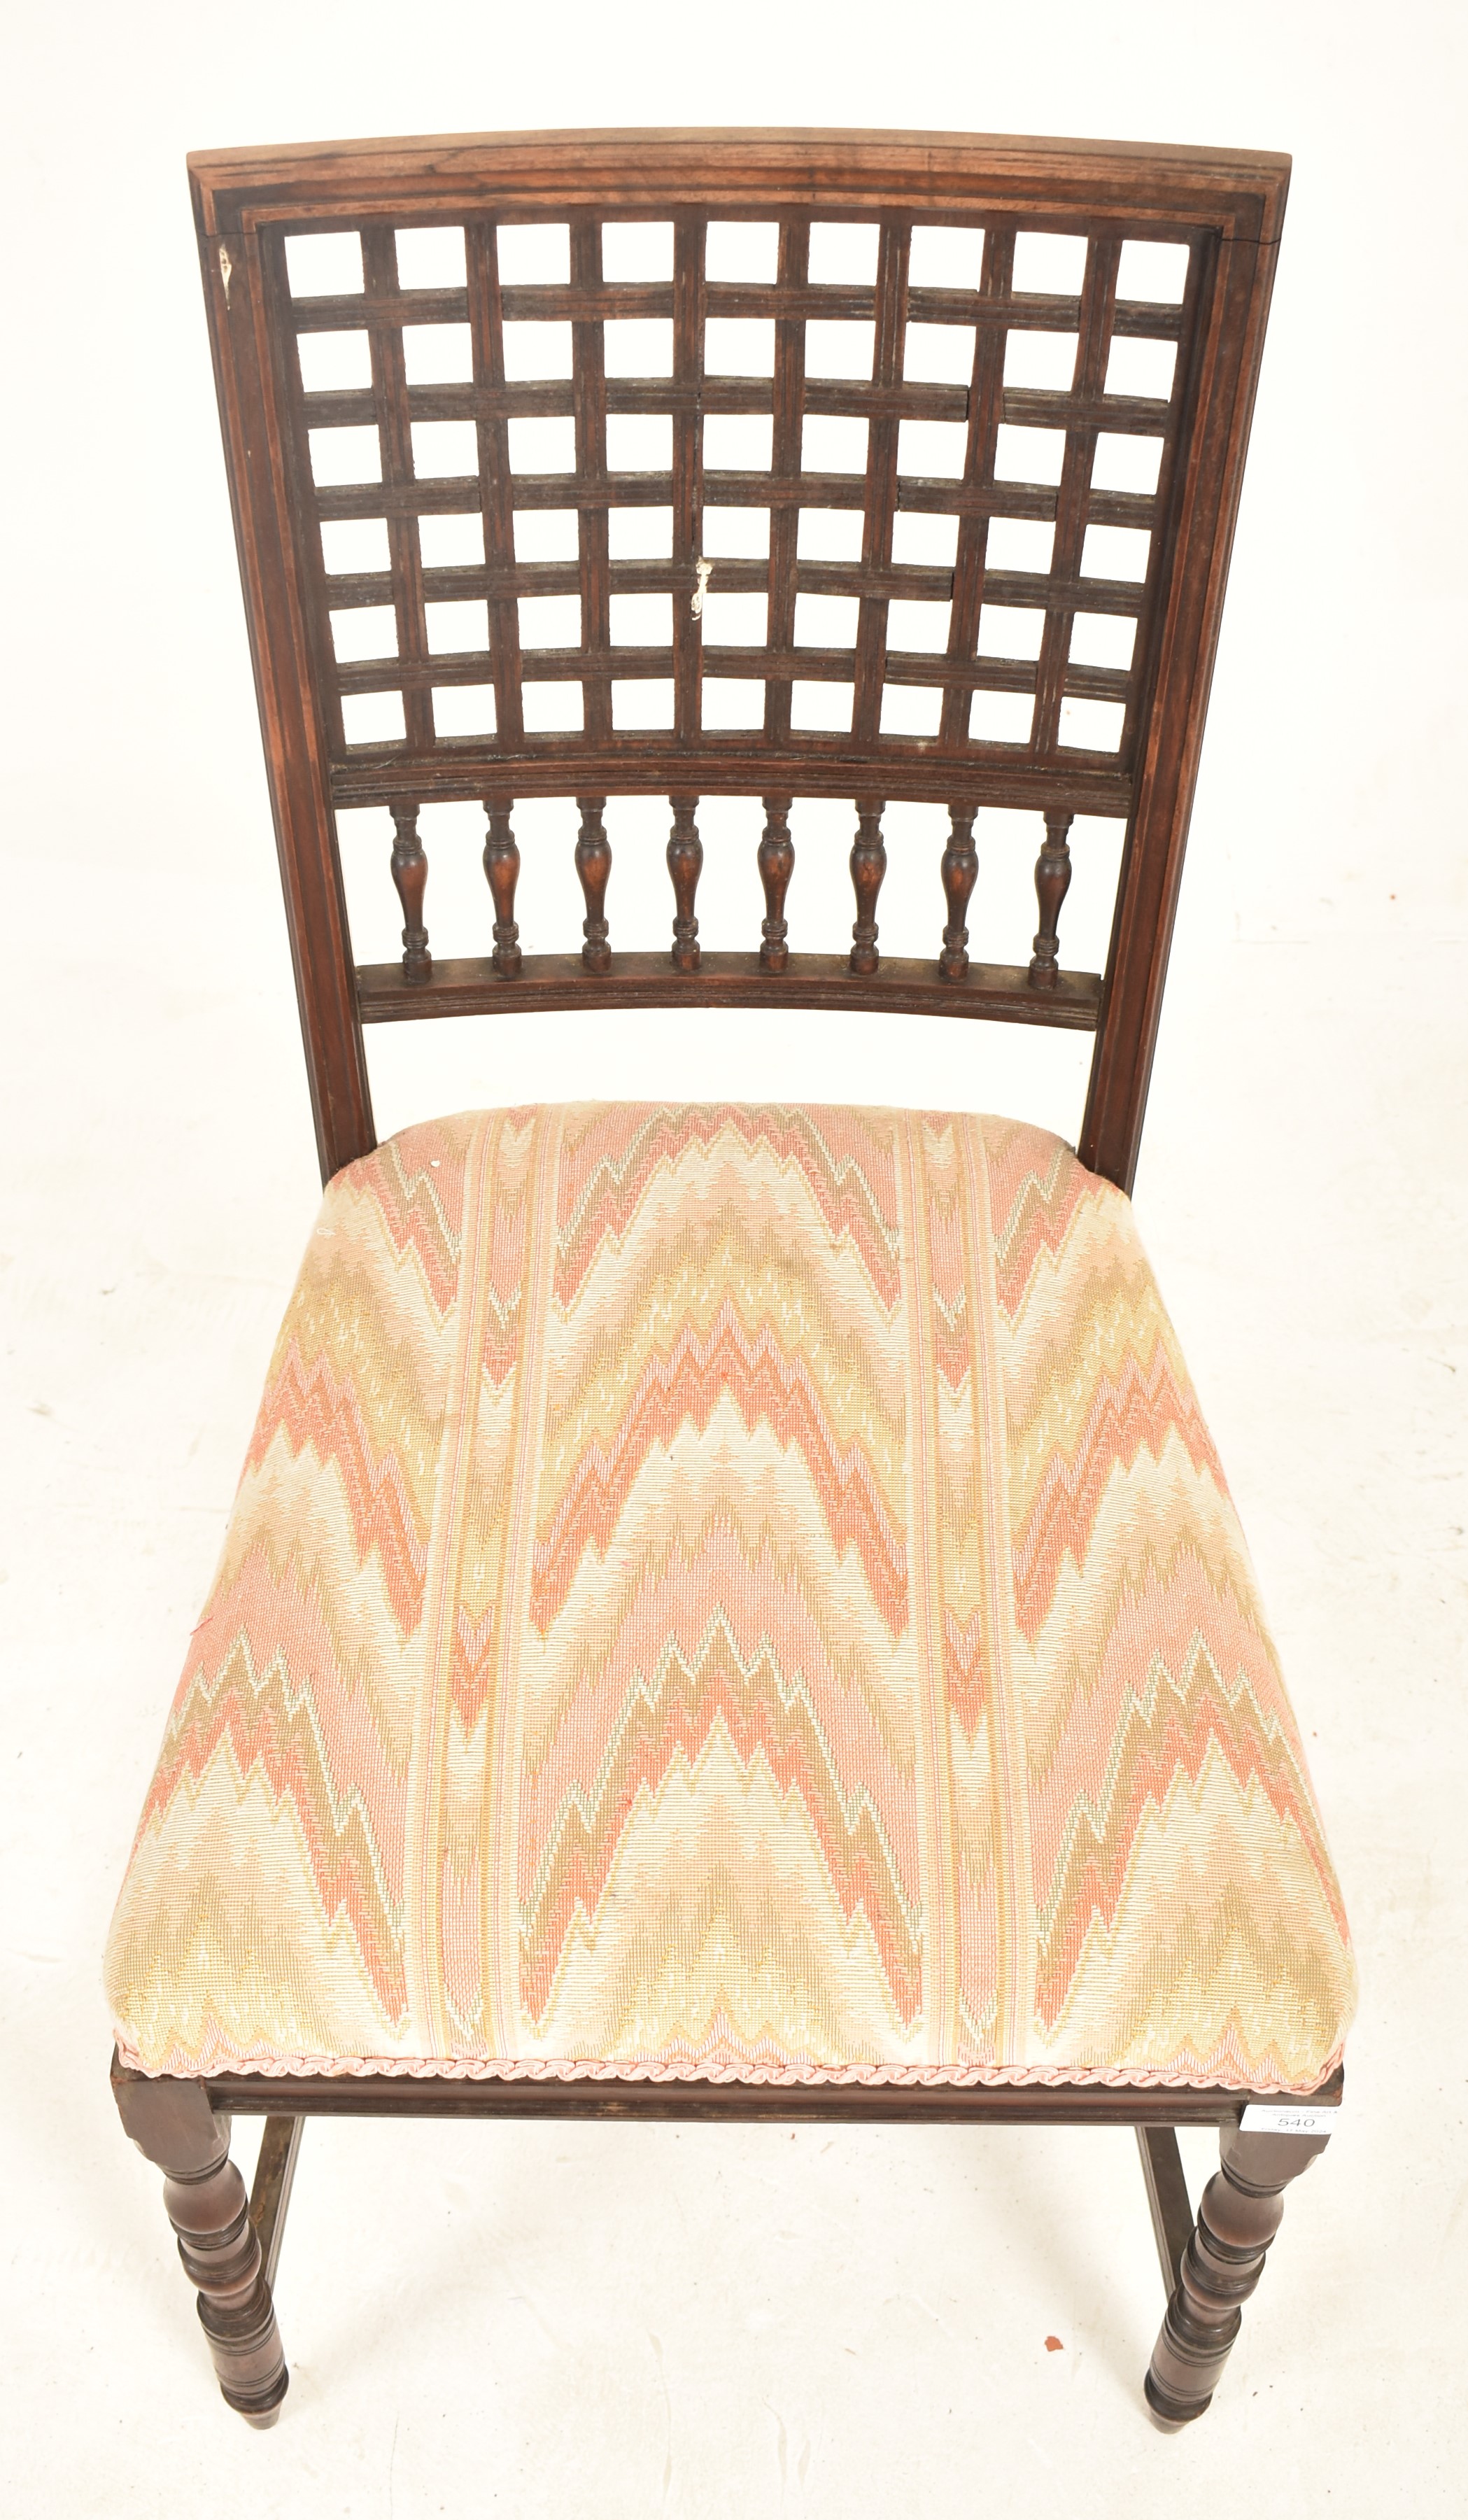 ARTS & CRAFTS 19TH CENTURY ROSEWOOD LATTICE BACK CHAIR - Image 2 of 5